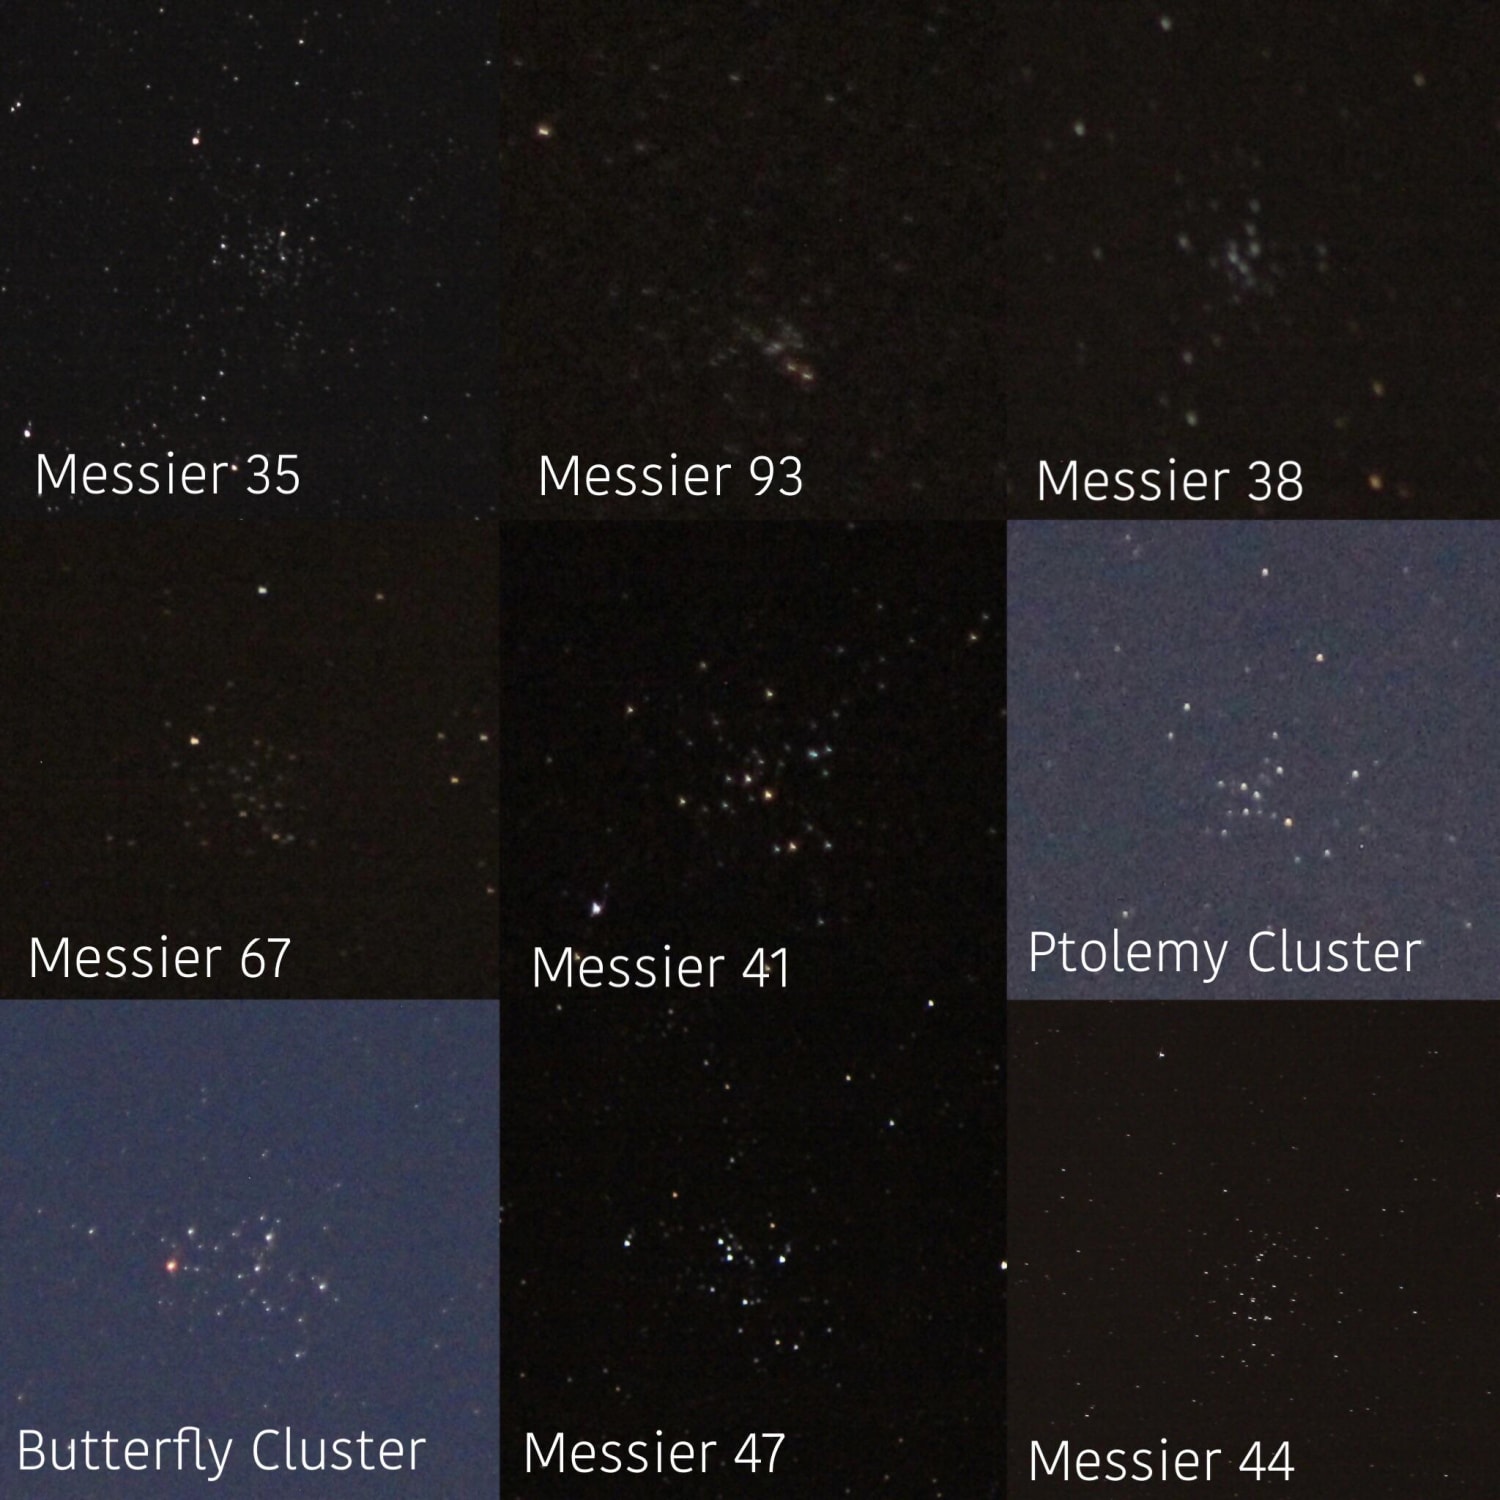 Messier star clusters